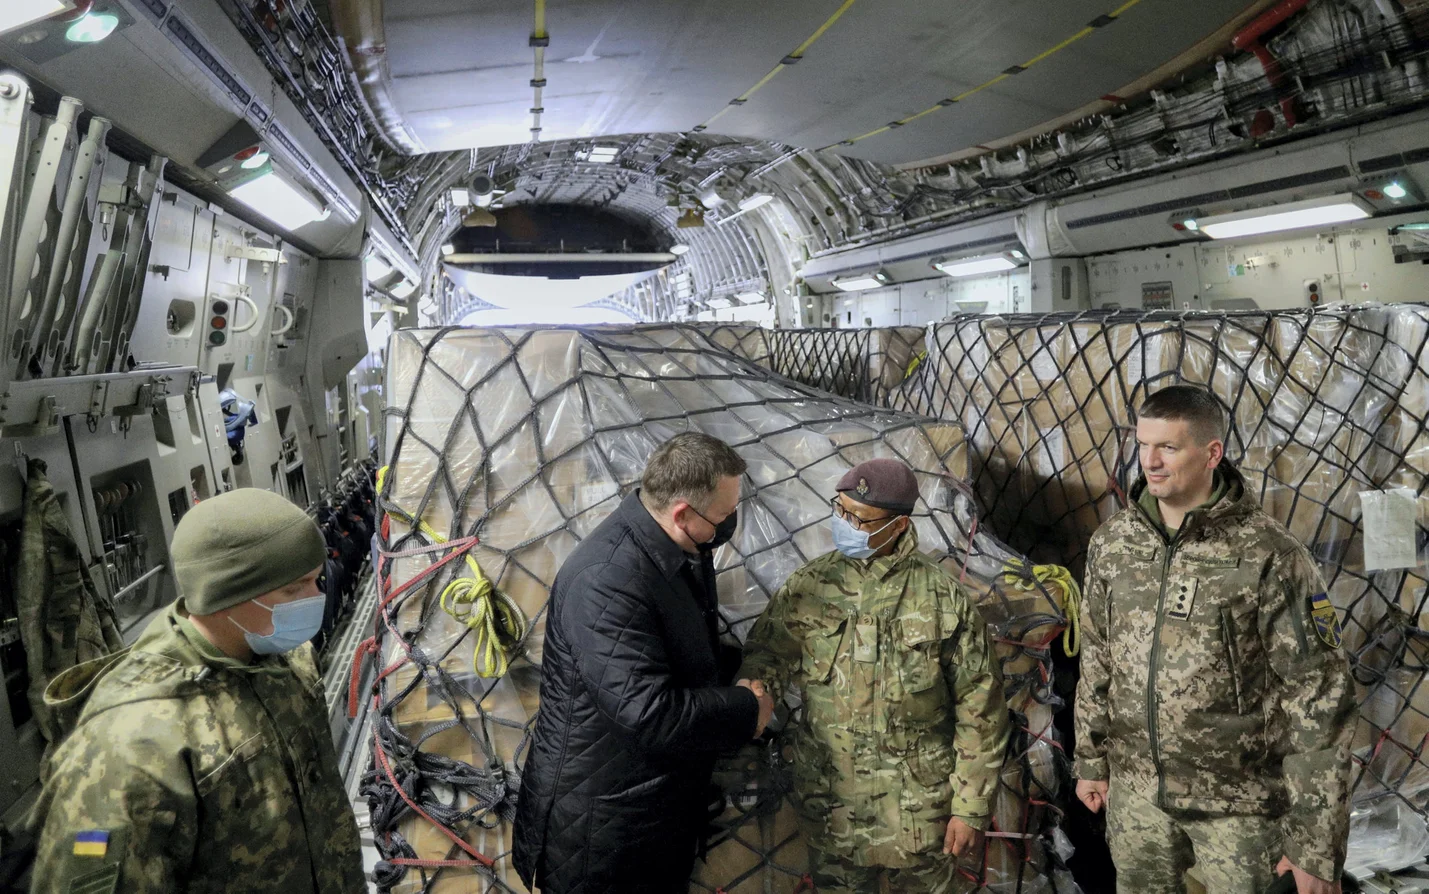 Ukrainian officials receive a shipment of Britain's military aid at Boryspil International Airport outside Kyiv, in February.Credit: Valentyn Ogirenko/Reuters